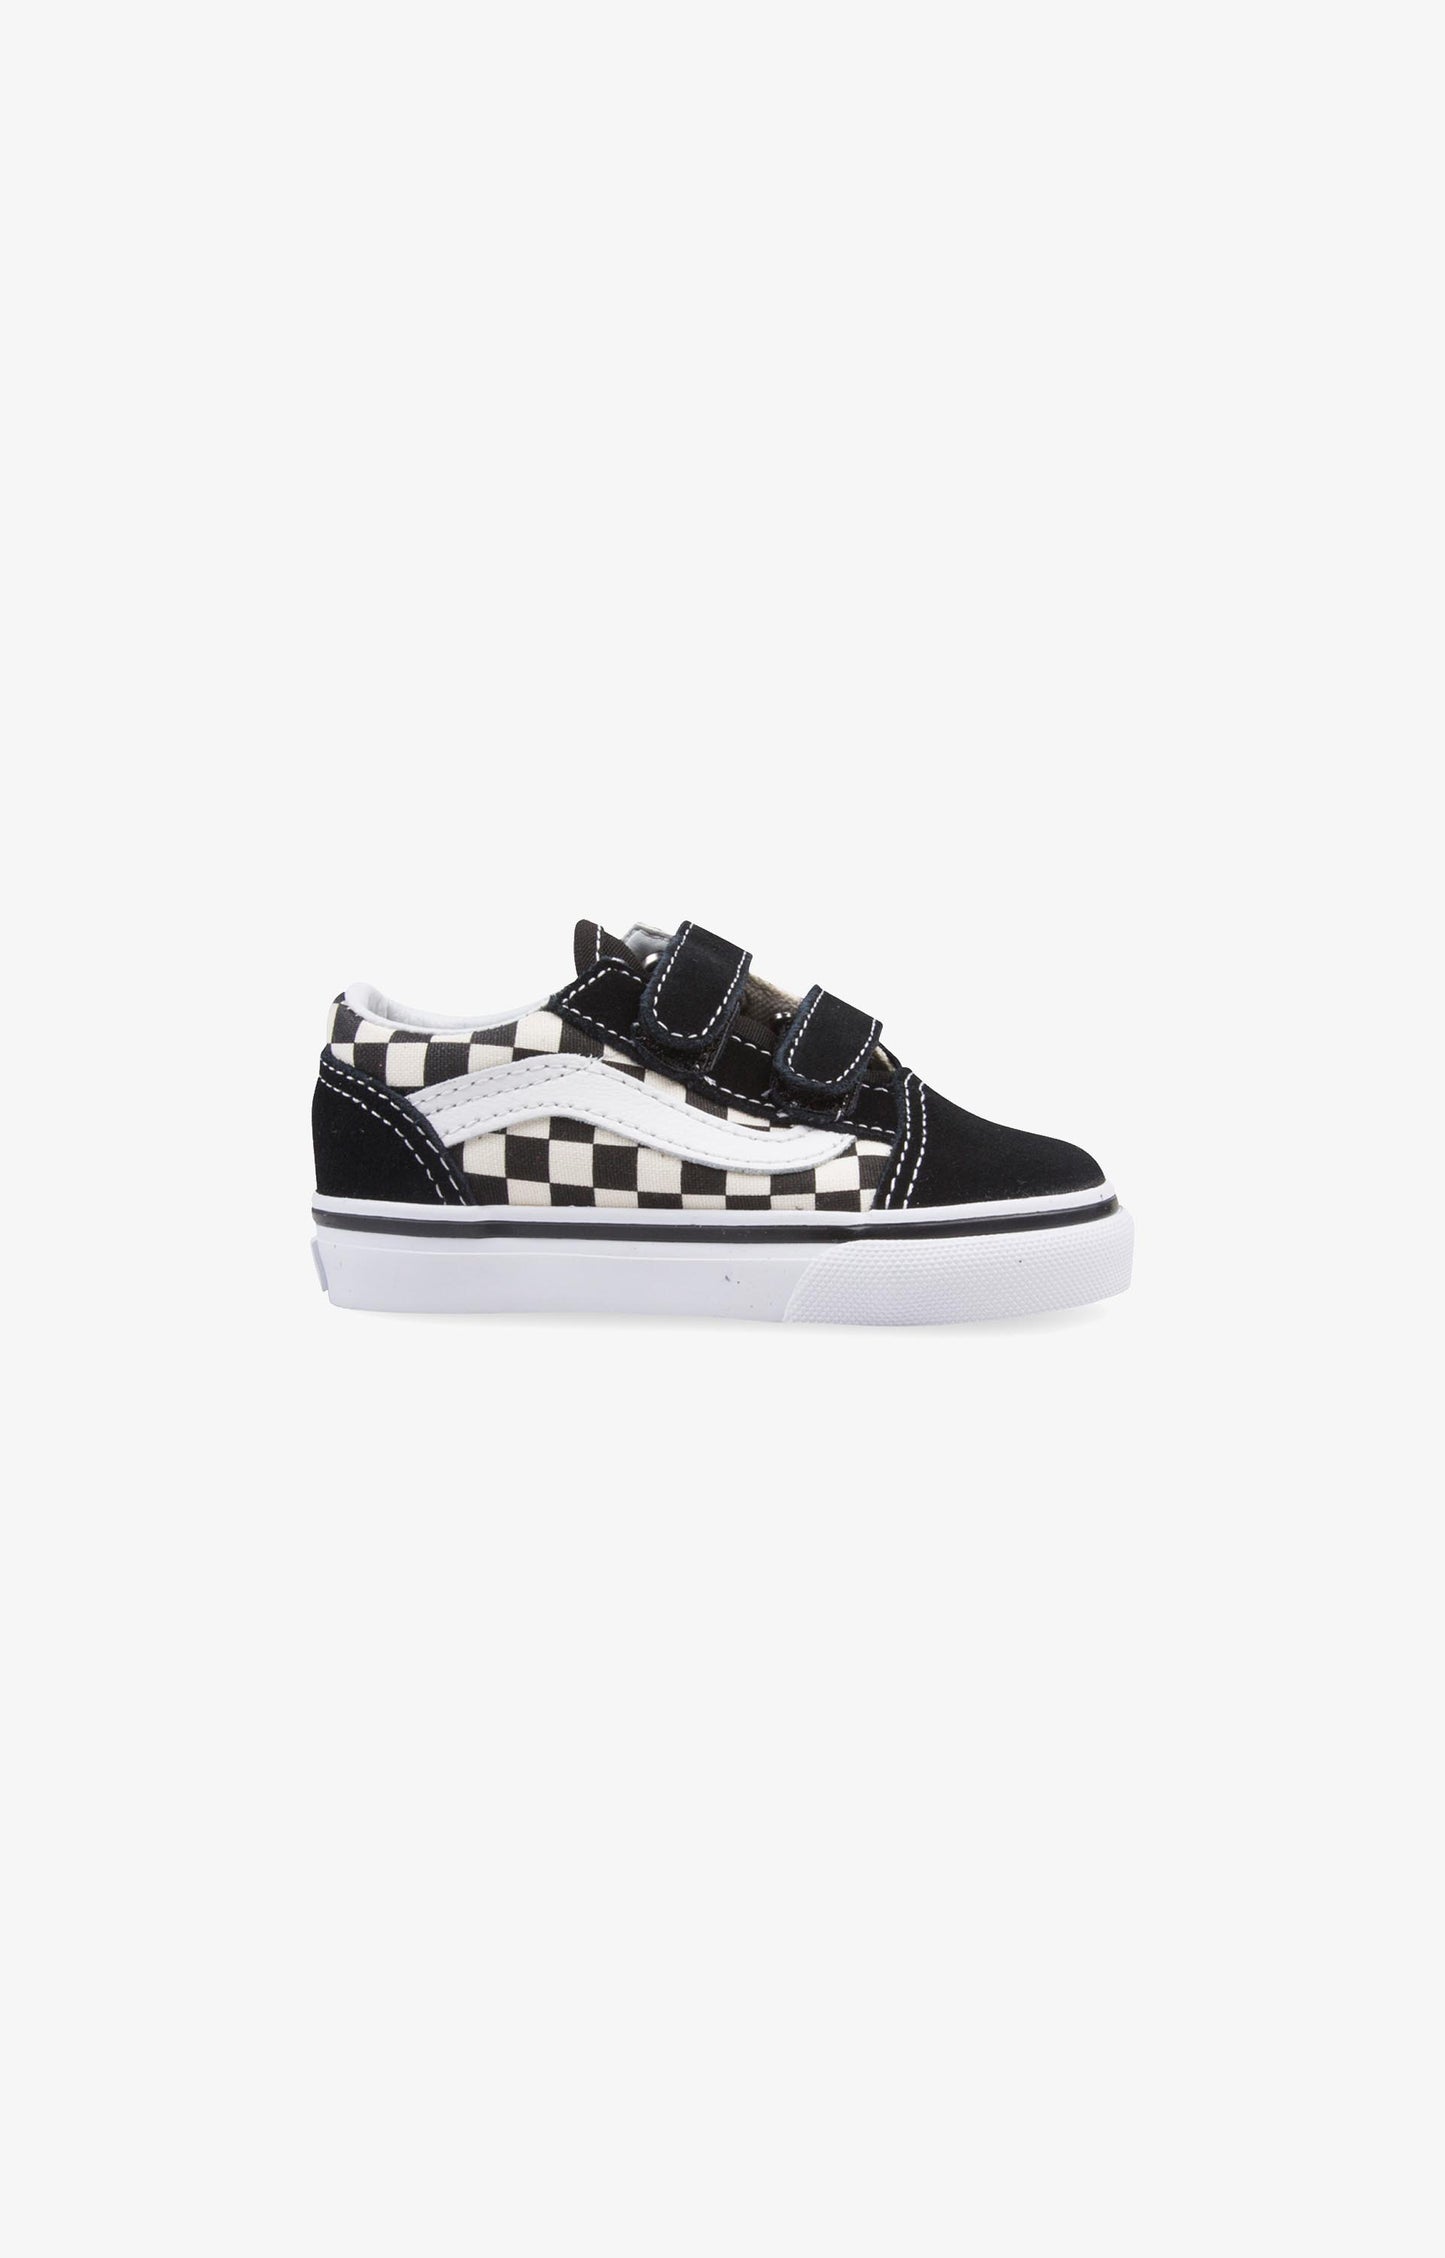 Vans Toddler Old Skool Velcro Classic Shoes, Check